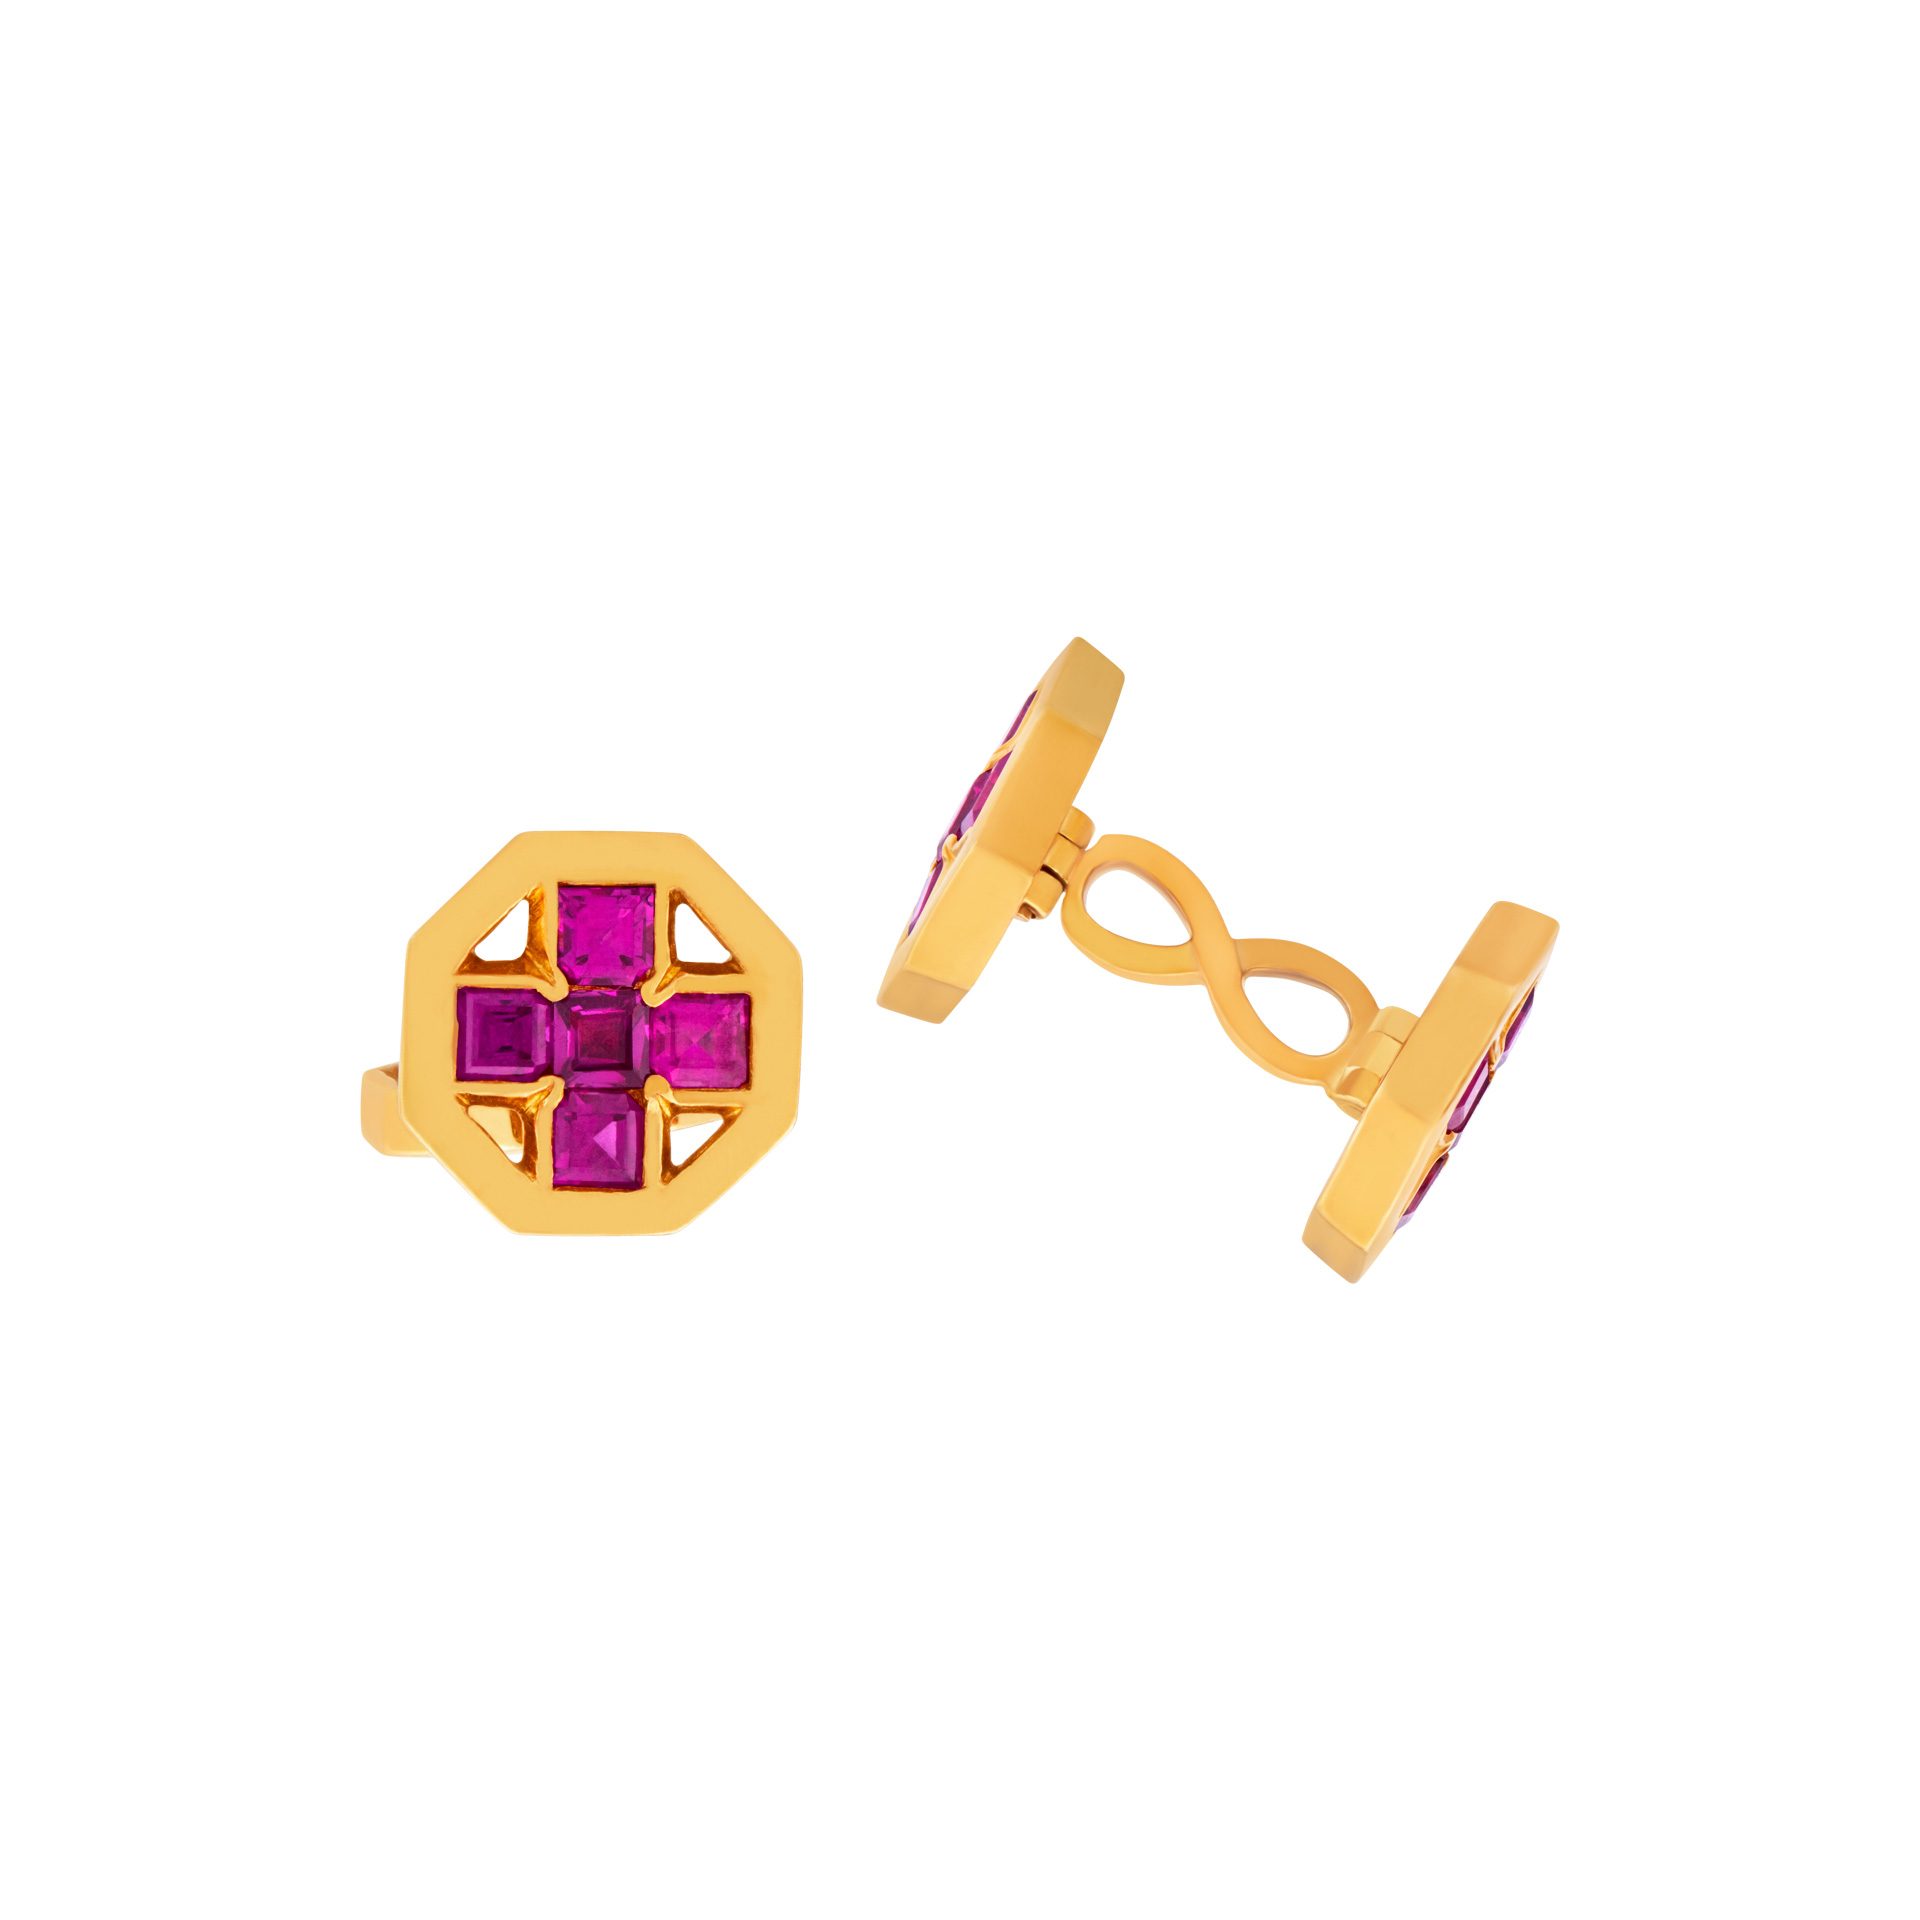 Vintage Cufflinks in 18k with square rubies